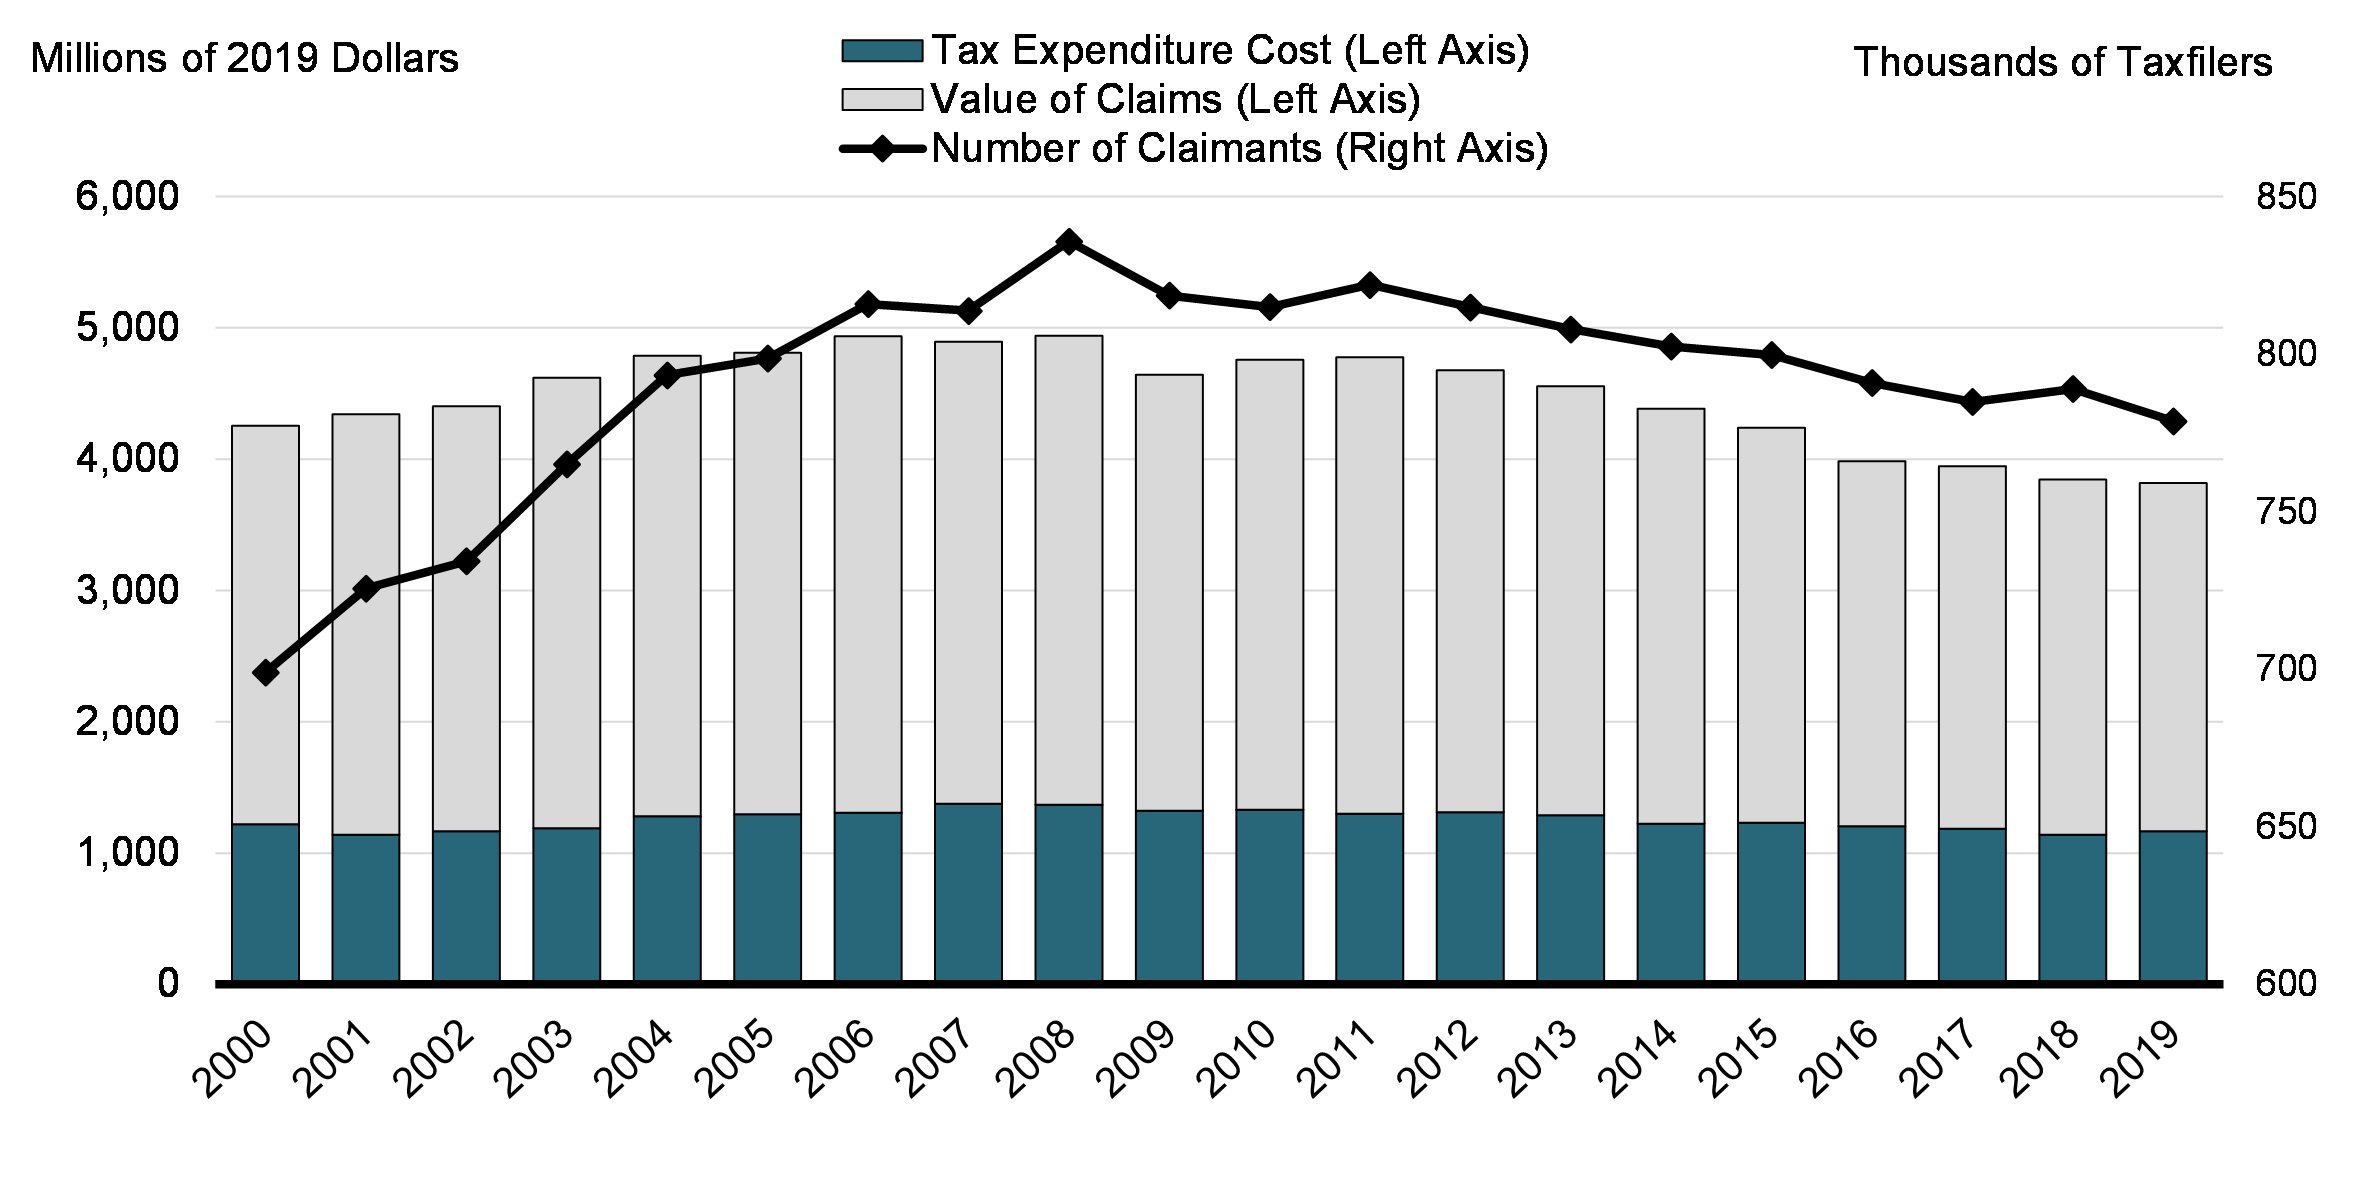  Value of OEE Claims, Associated Tax Expenditure Cost, and Number of Claimants 
(2000-2019)

